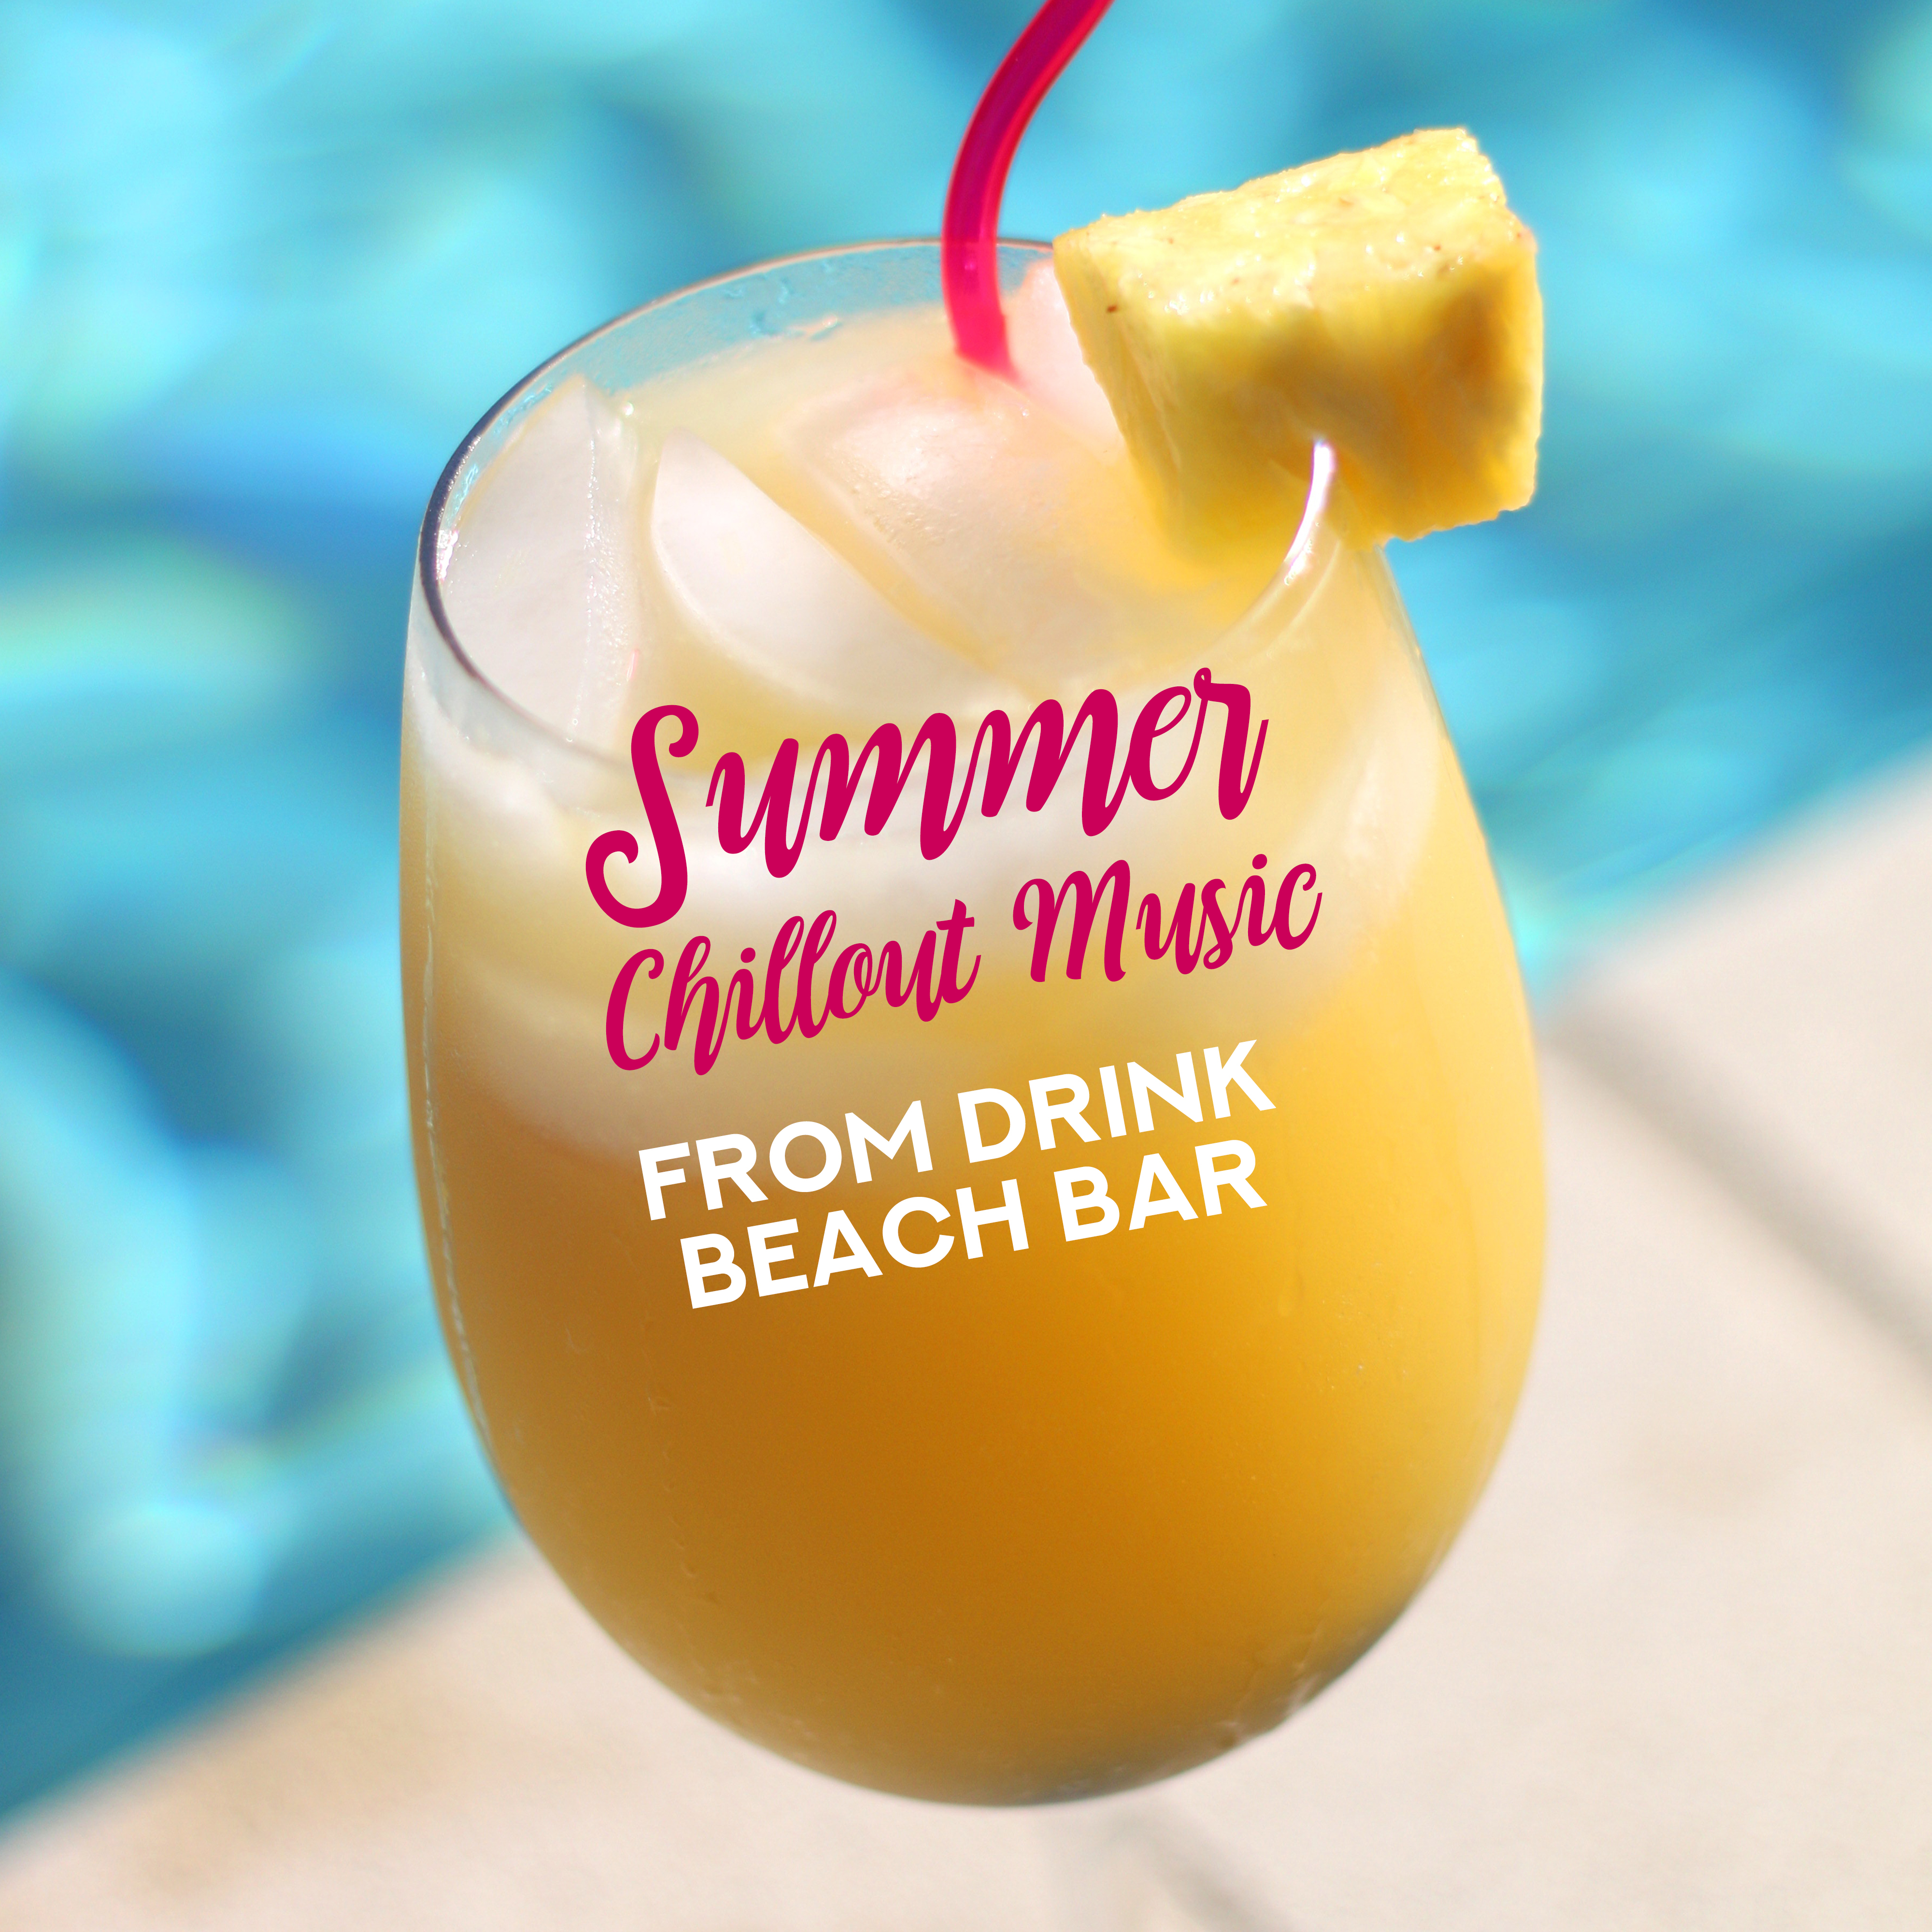 Summer Chillout Music from Drink Beach Bar